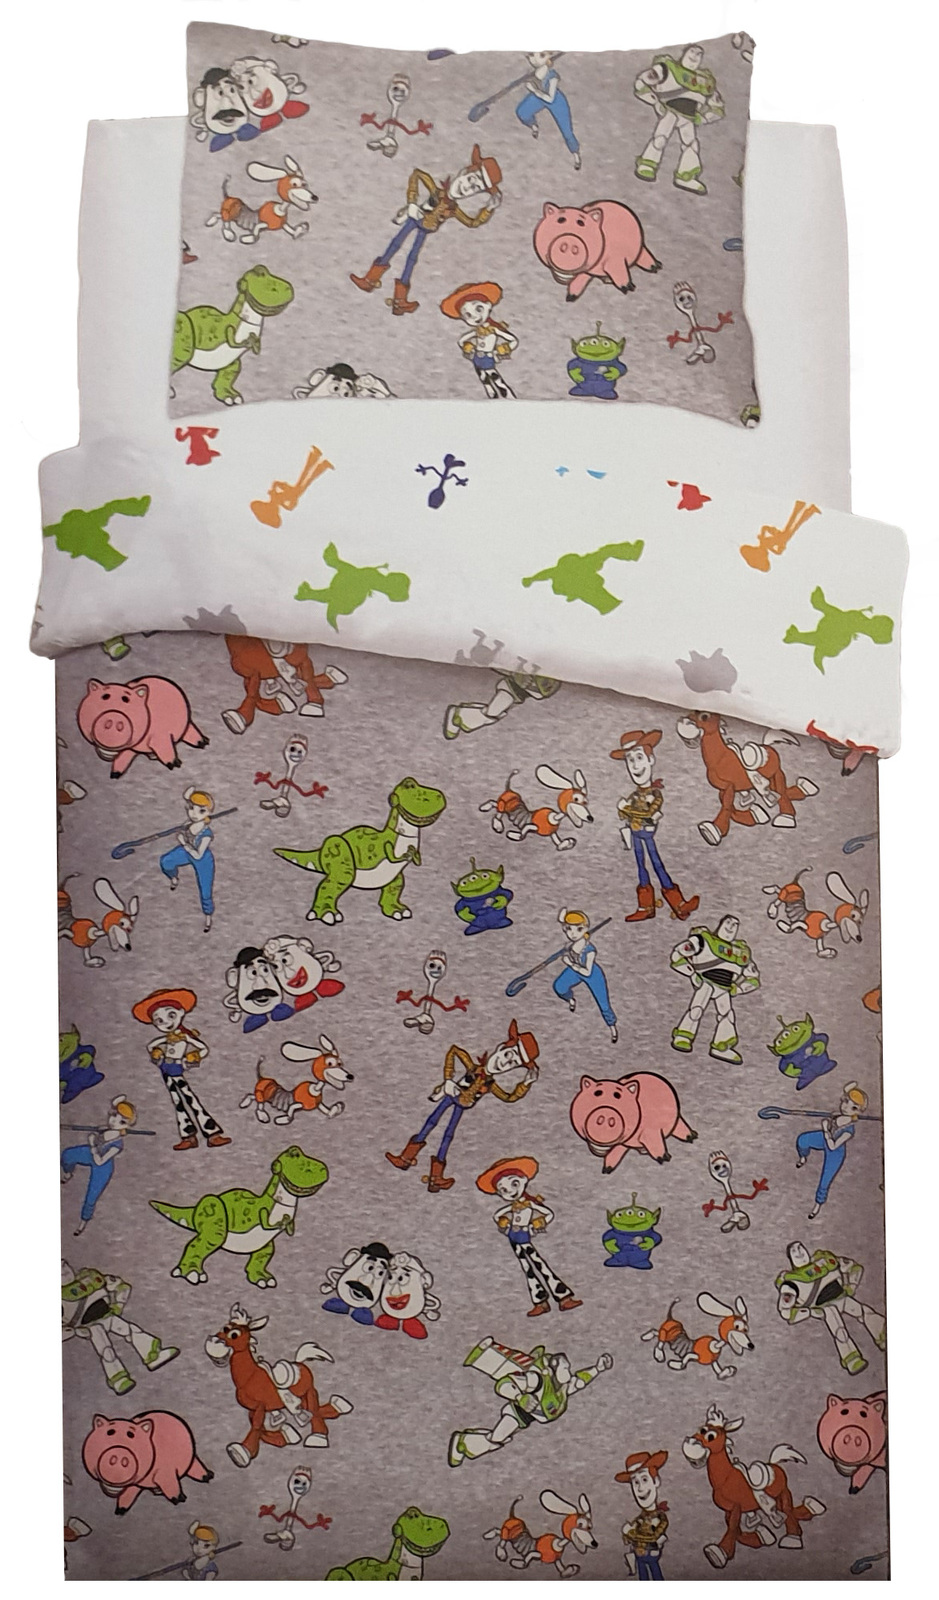 toy story quilt set